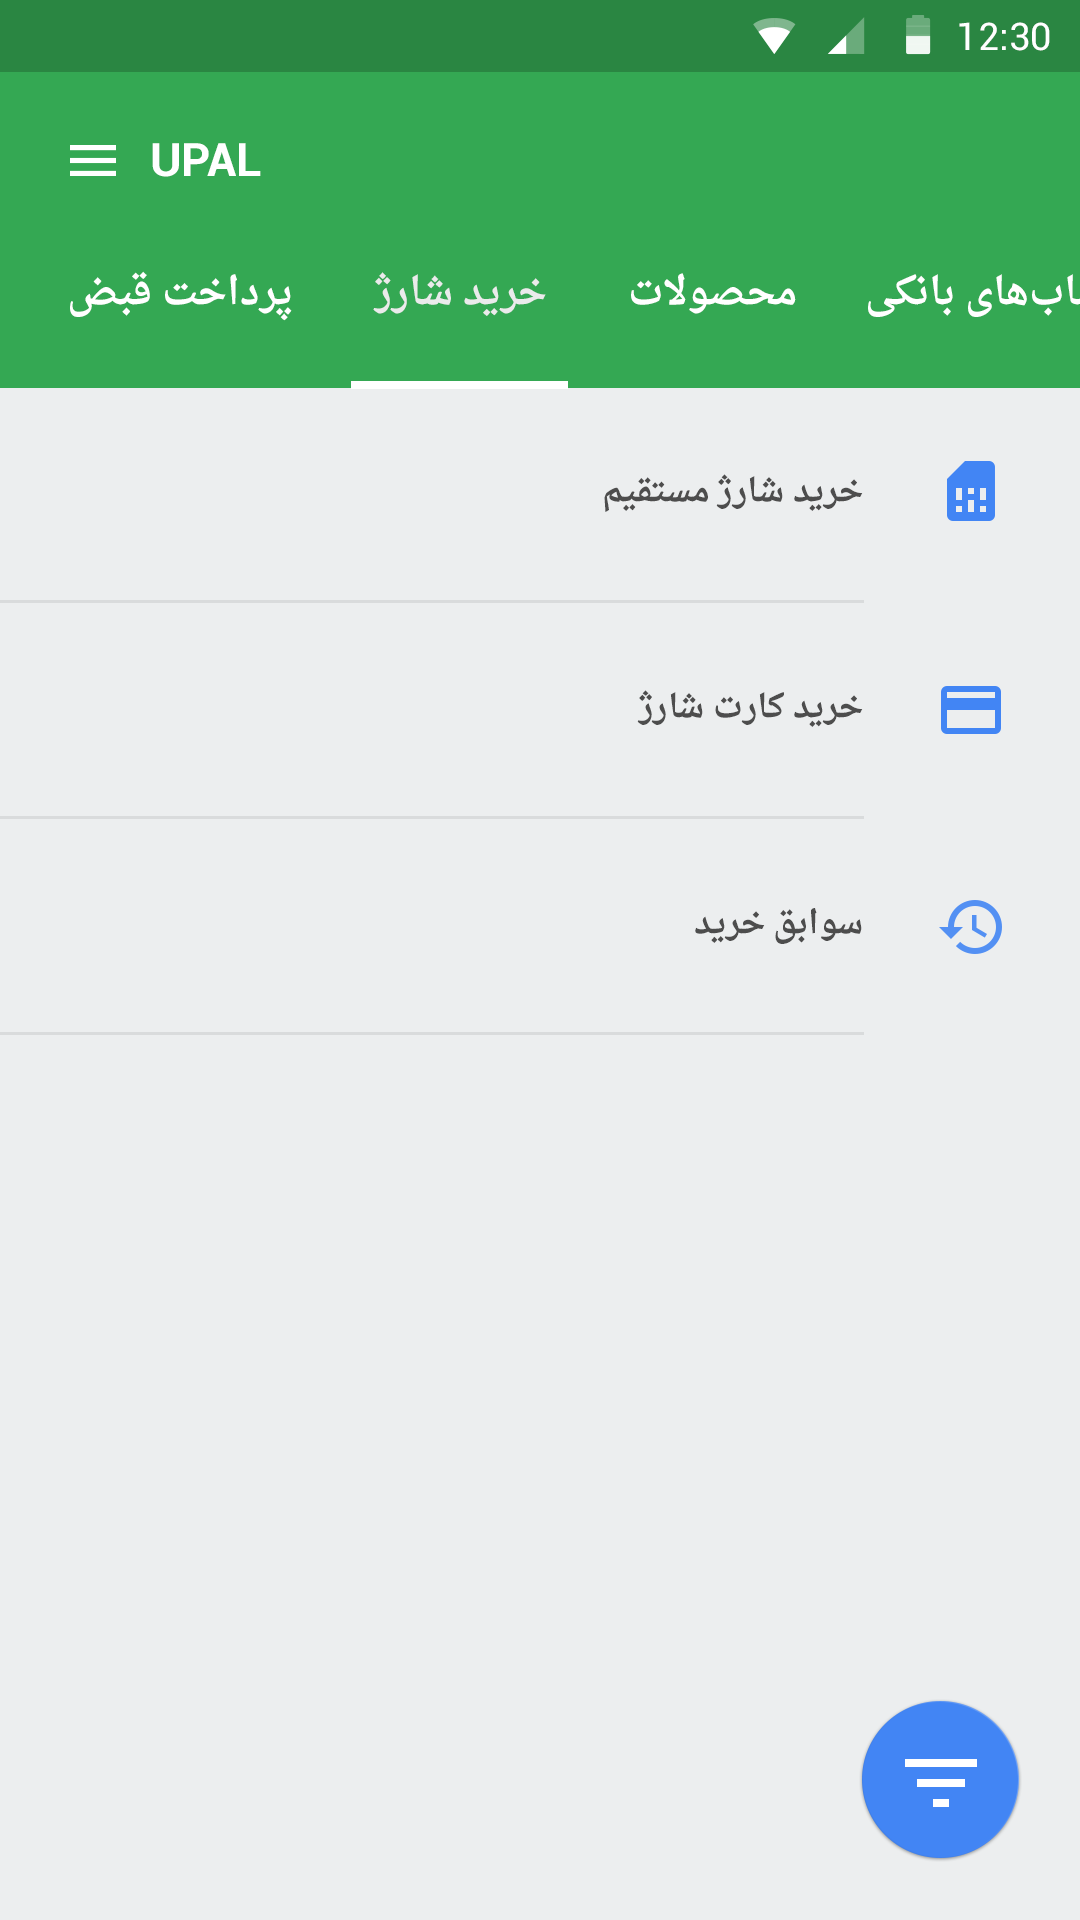 Upal for Android by Pouya Saadeghi - /projects/GEmxSqeTlv0AKAnFO0sMh7JolrWPYP65.png